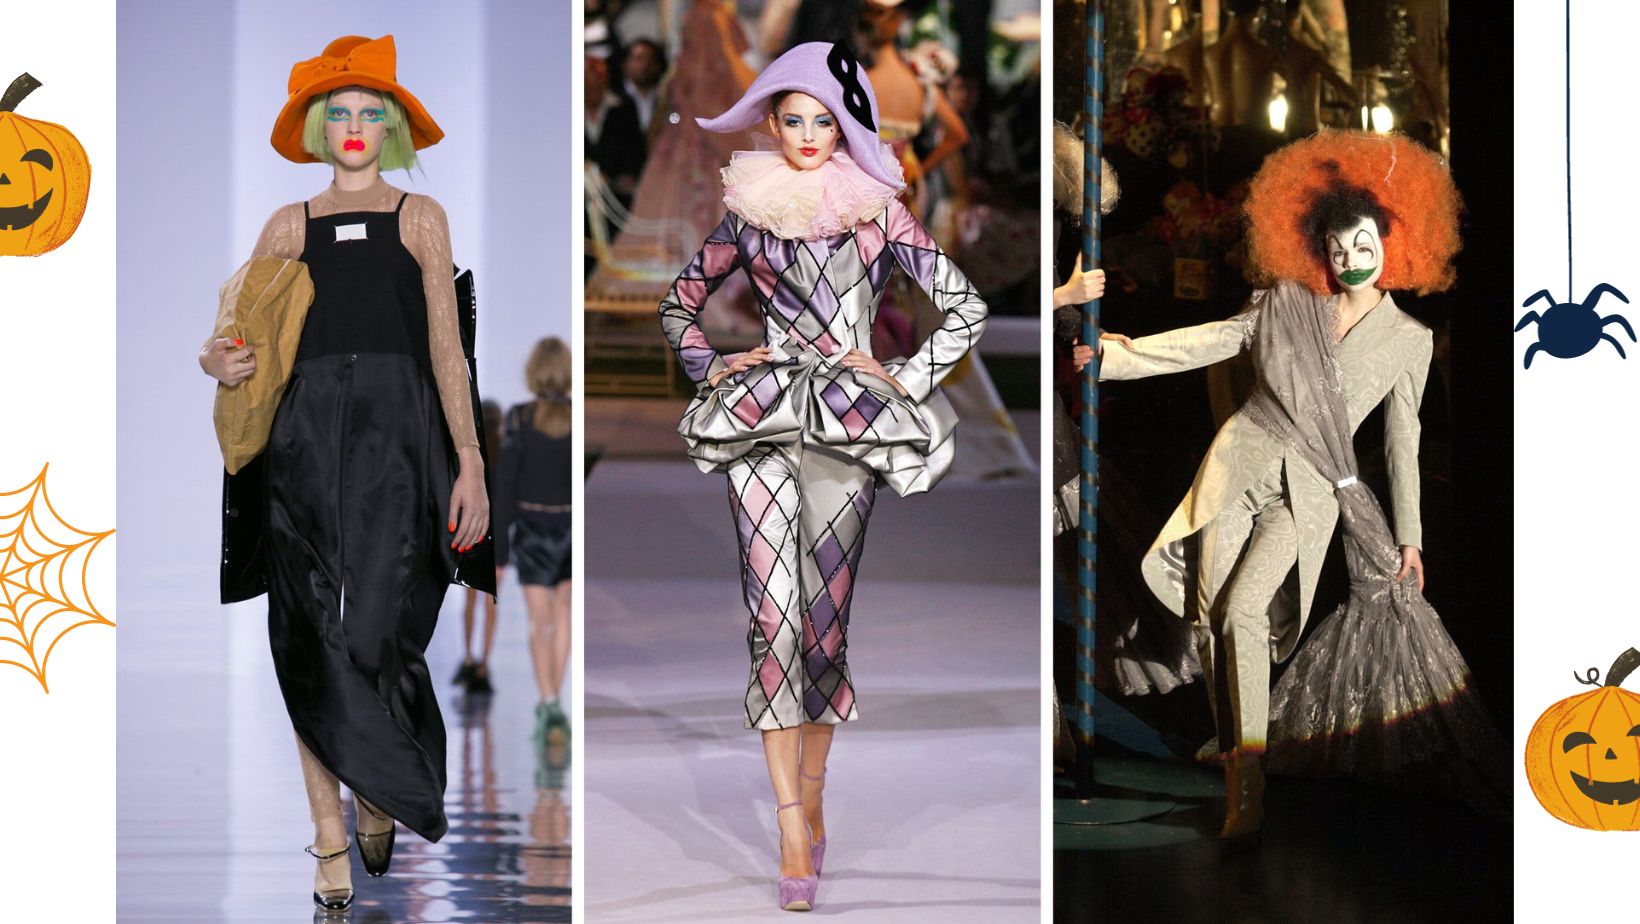 10 Fashionable Halloween Costume Ideas Inspired By The Runway